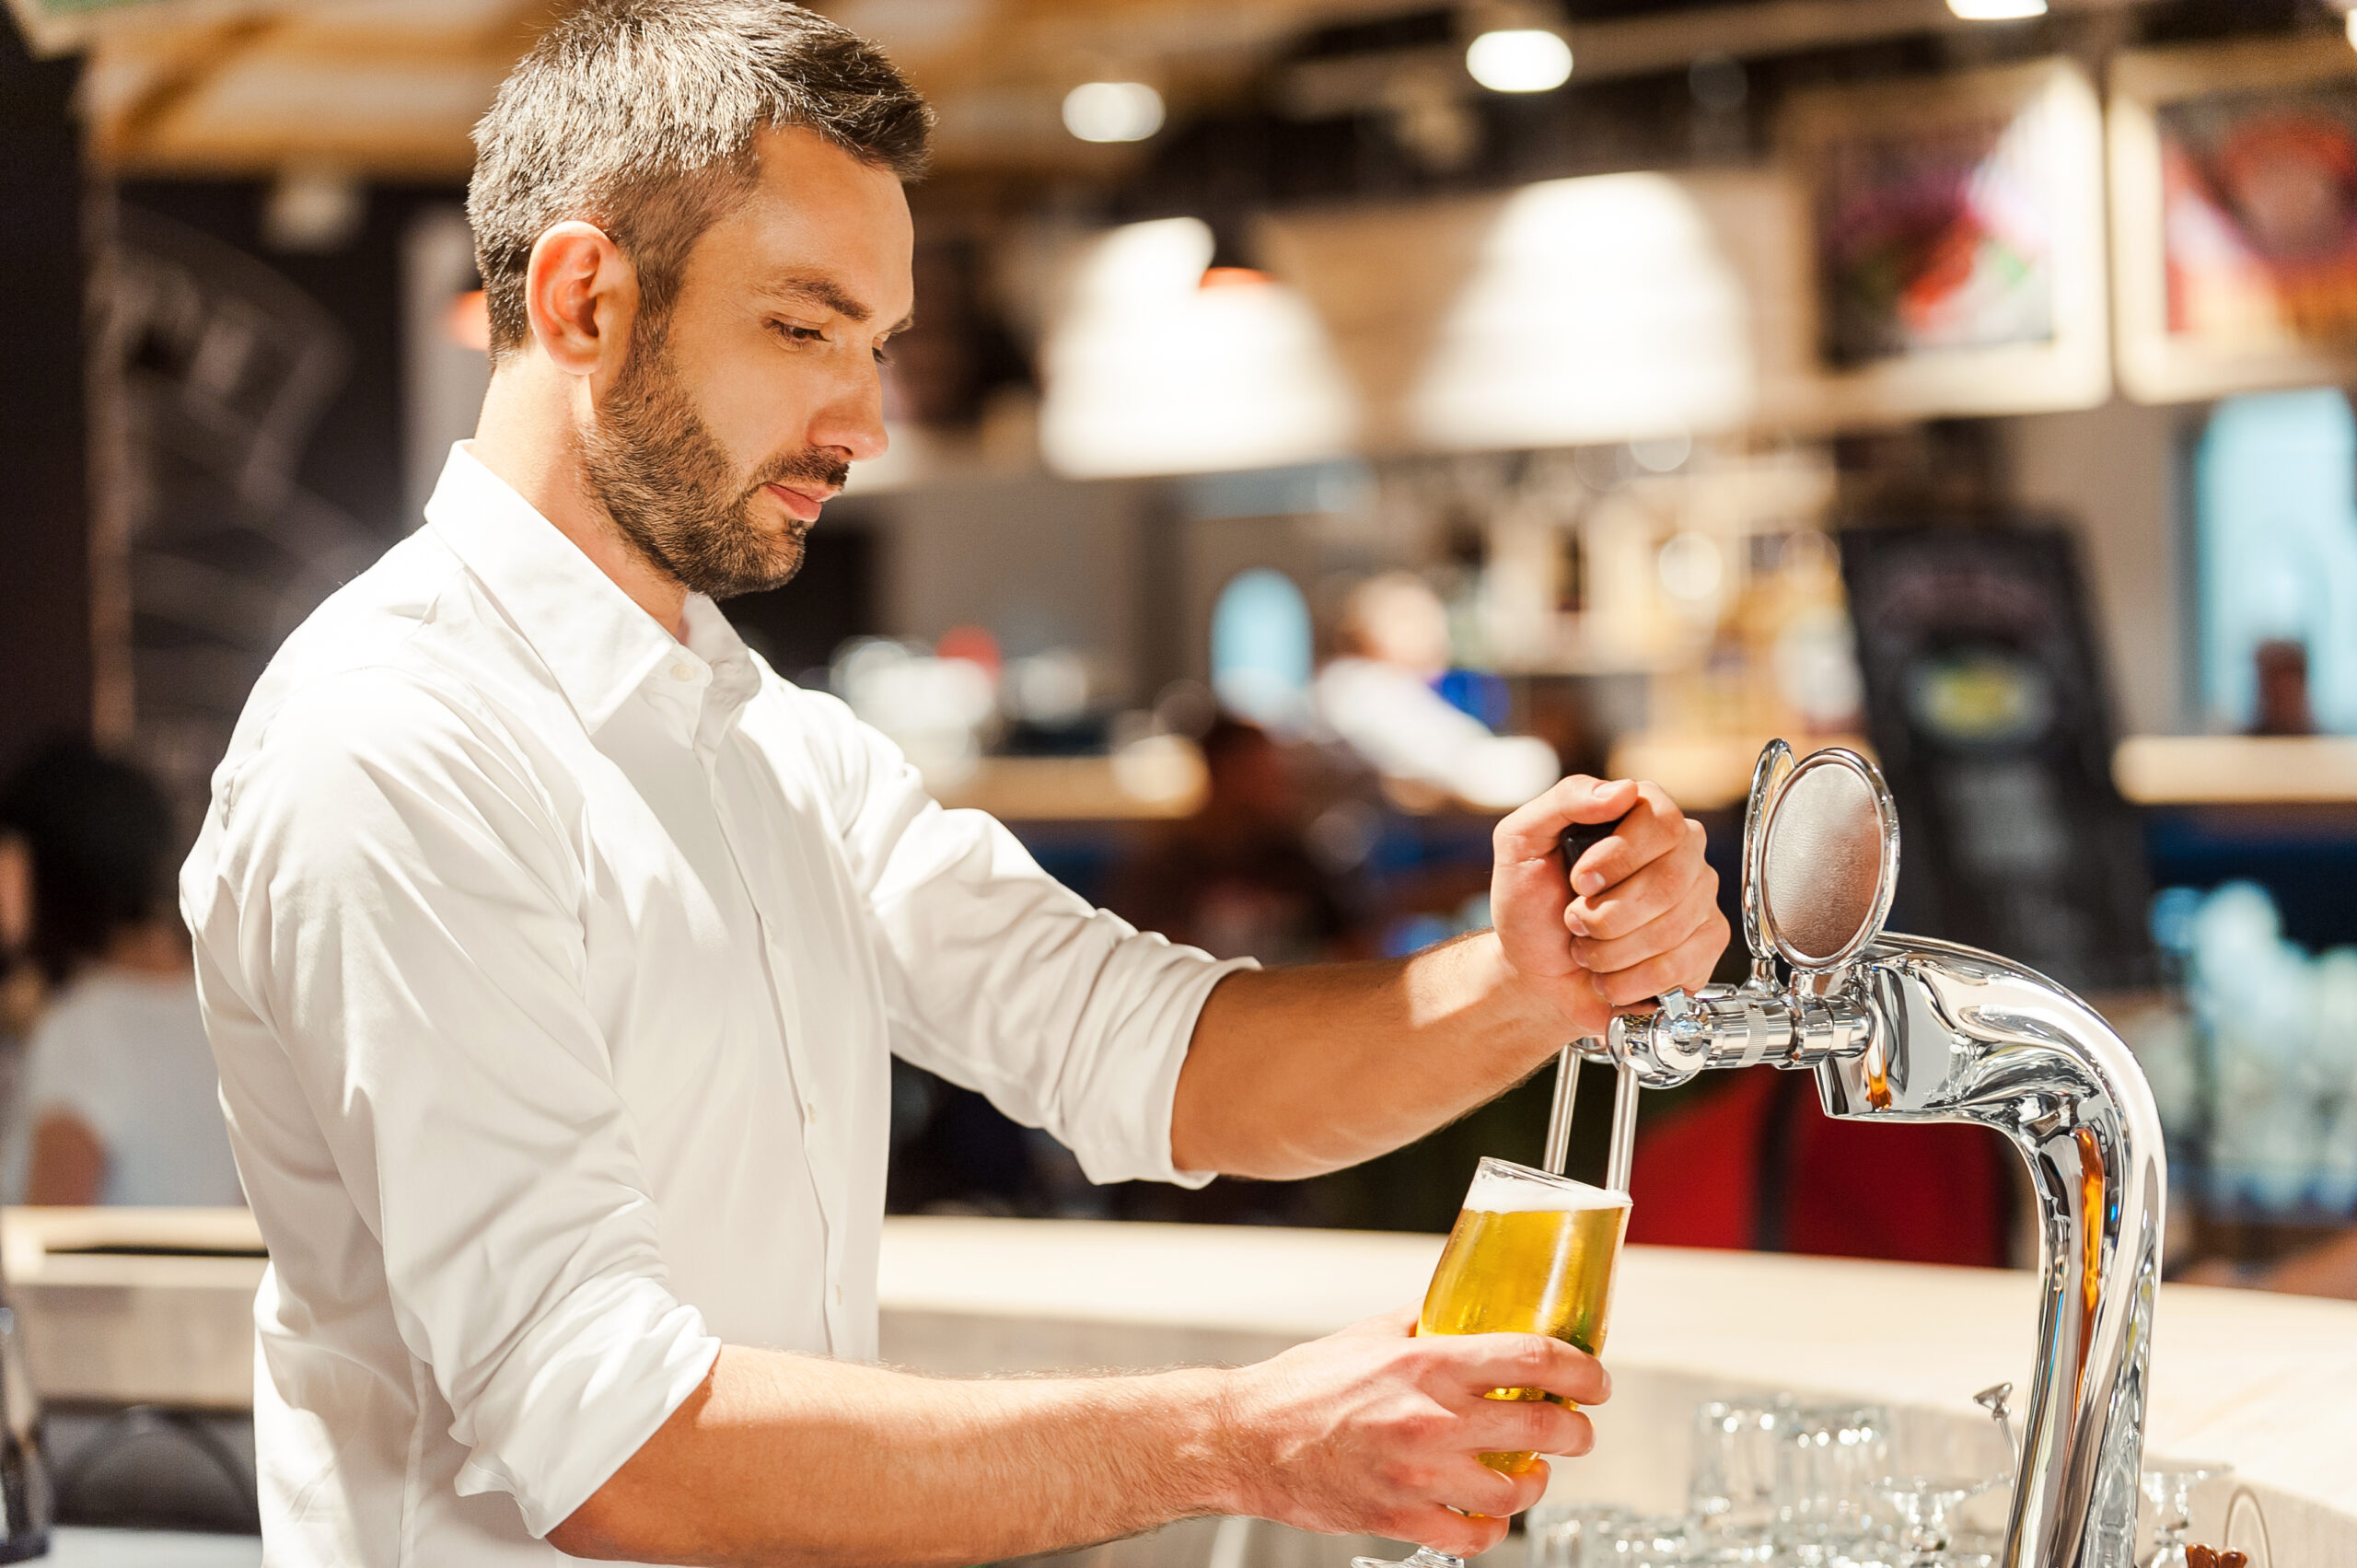 Pouring beer for client. Side view of young bartender pouring beer while standing at the bar counter